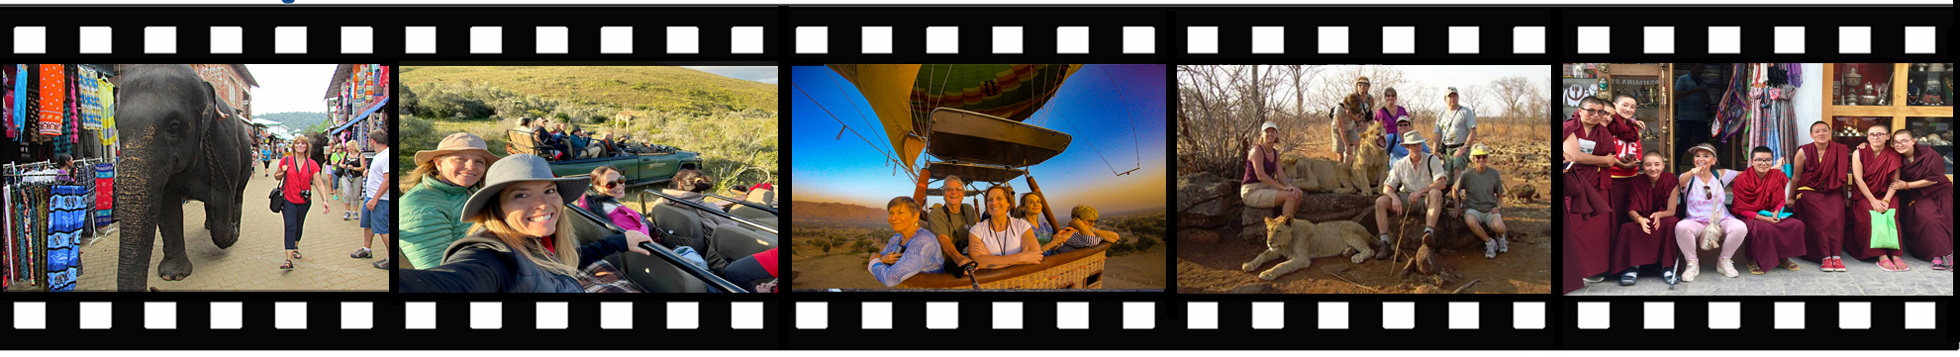 film strip with trip pictures